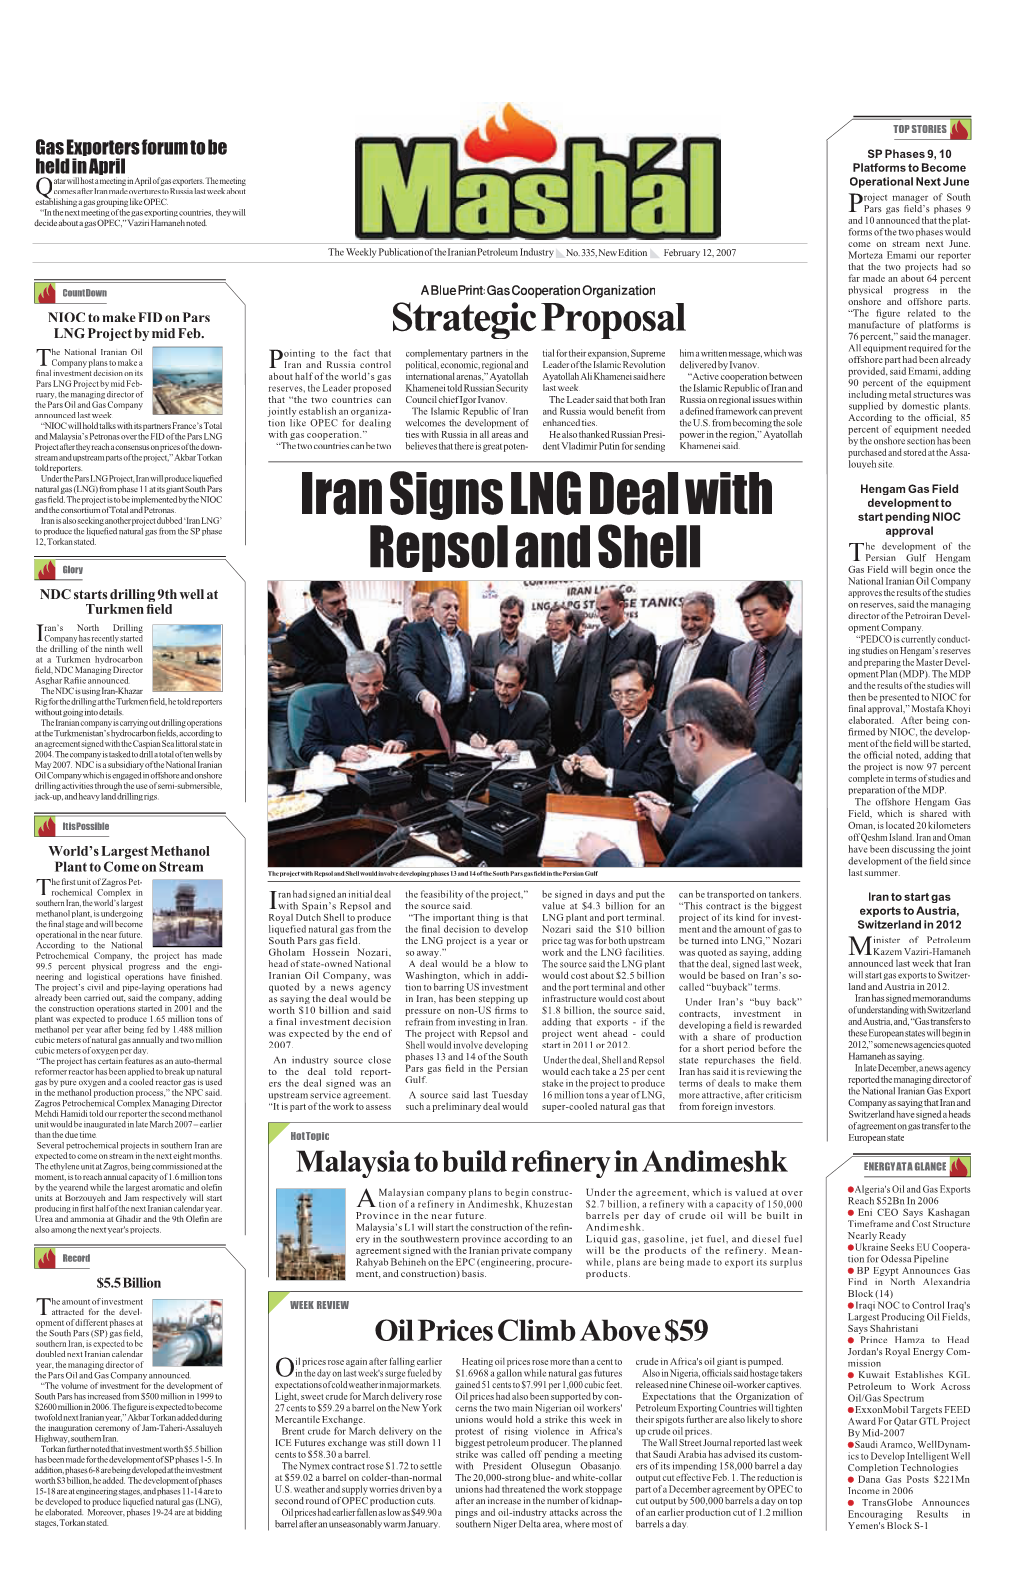 Iran Signs LNG Deal with Repsol and Shell